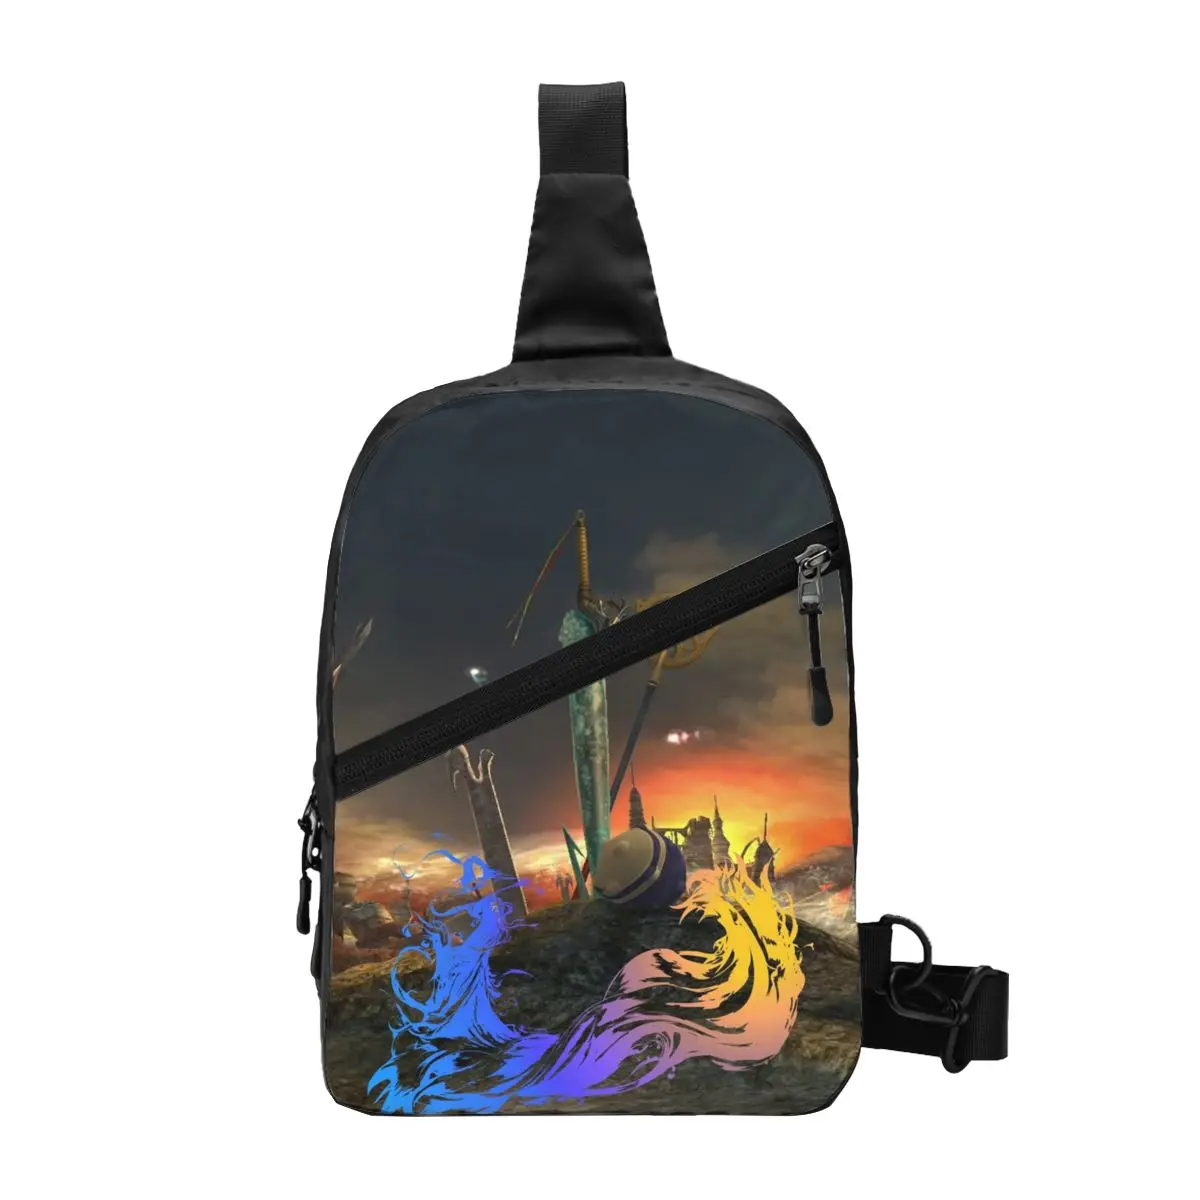 

FINAL FANTASY BAG FINAL FANTASY Chest Bag this is my story game Motorcycle Shoulder Bags Unisex Graphic Design Vintage Small Bag